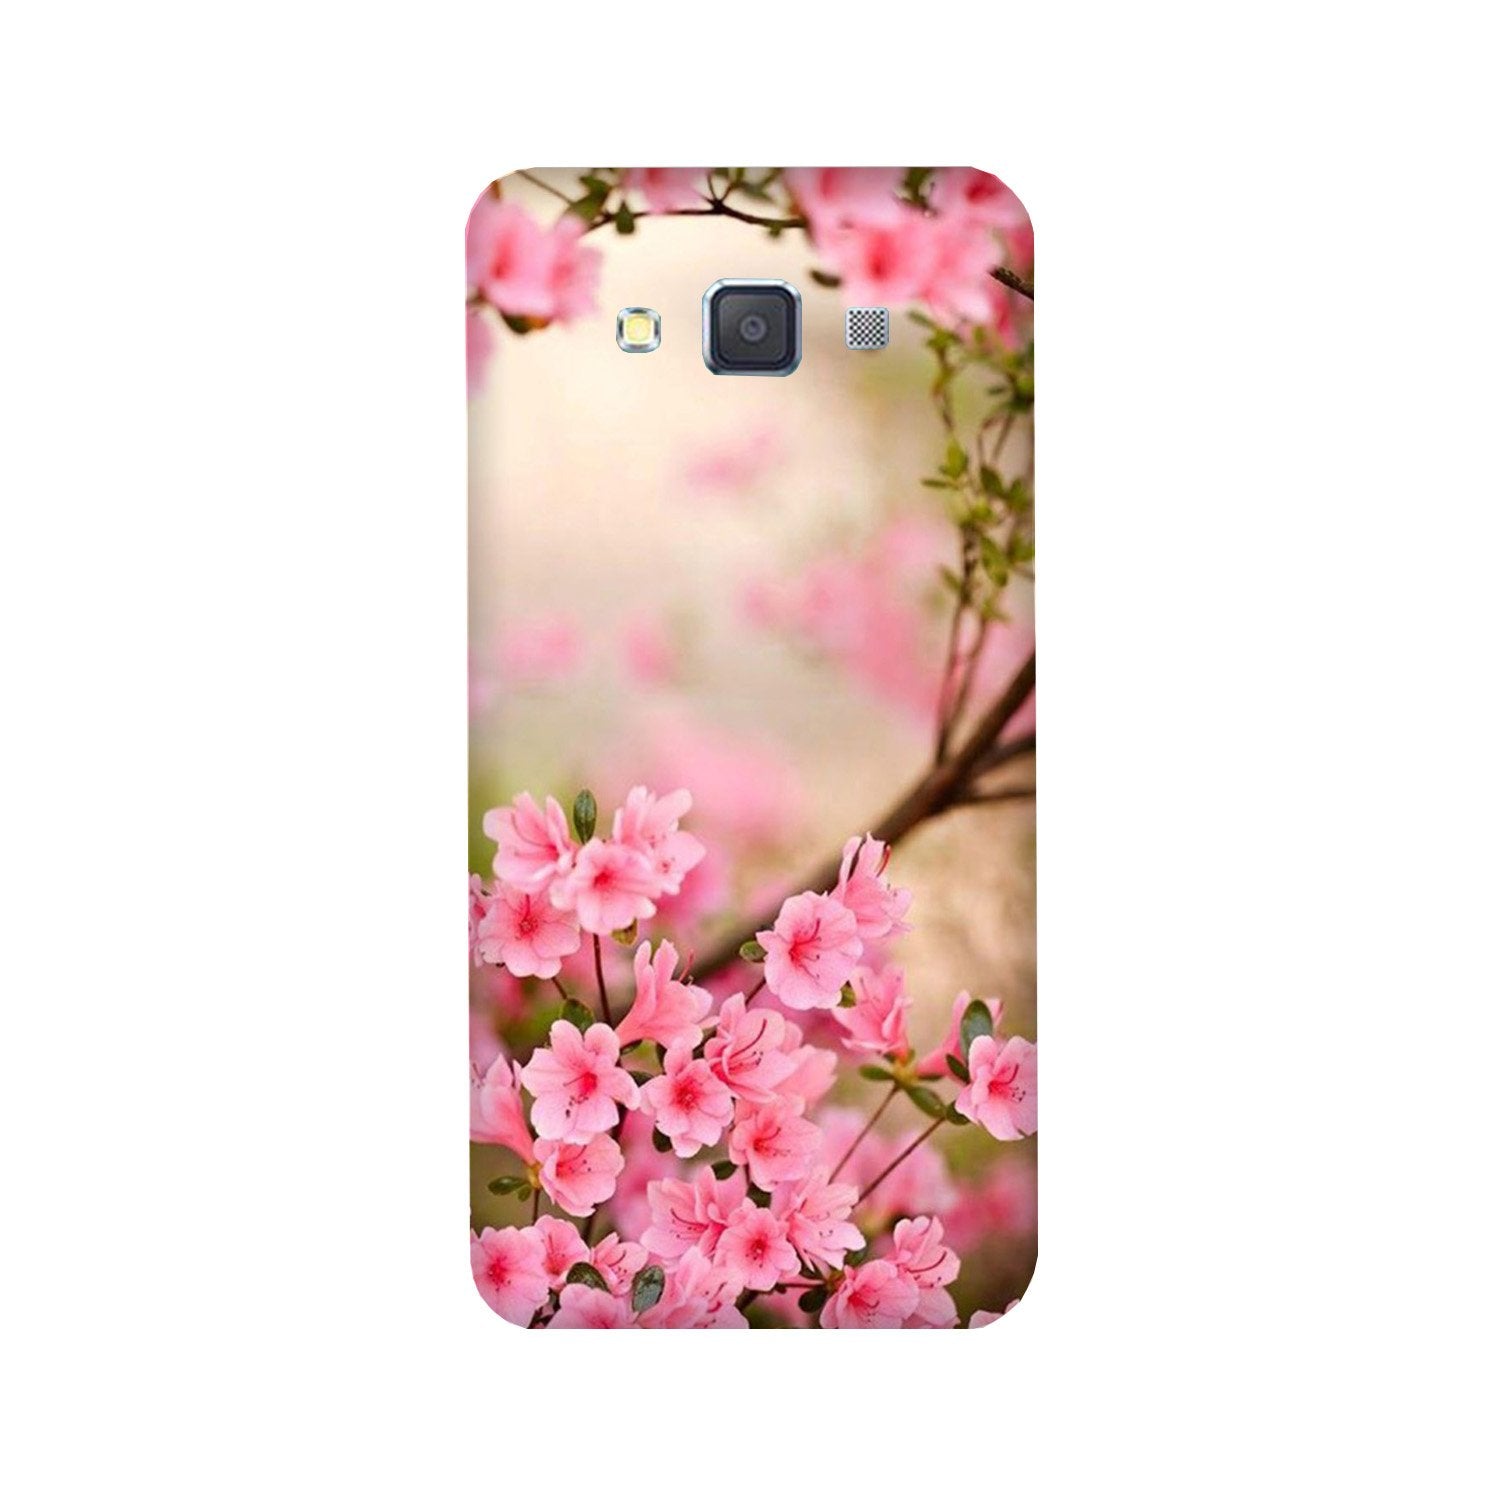 Pink flowers Case for Galaxy E7